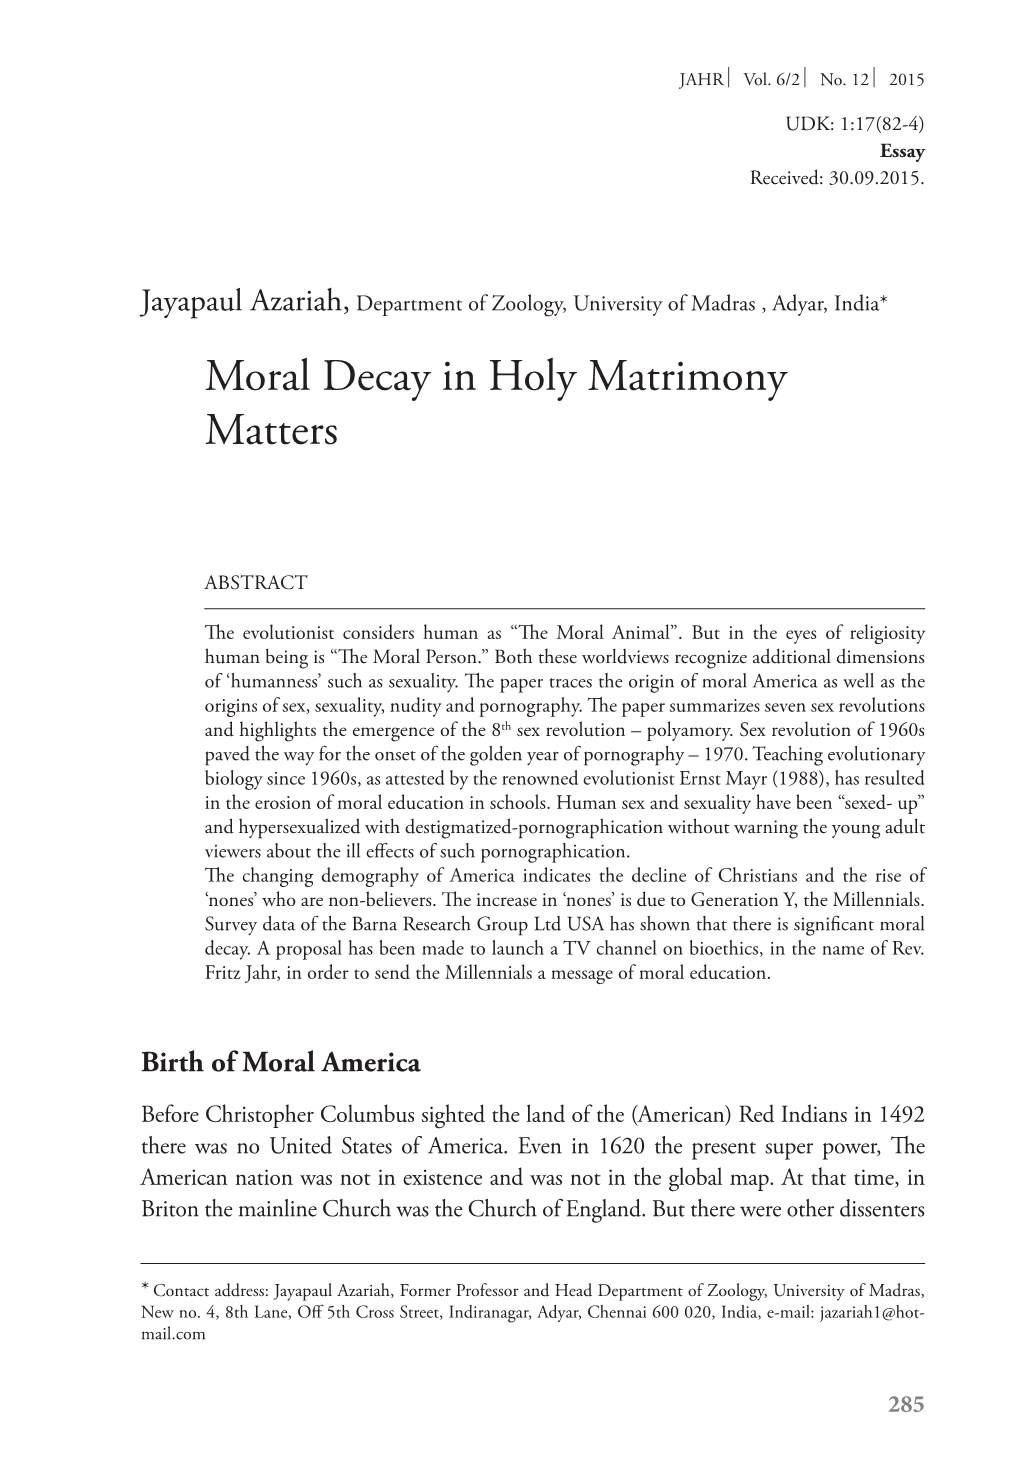 Moral Decay in Holy Matrimony Matters